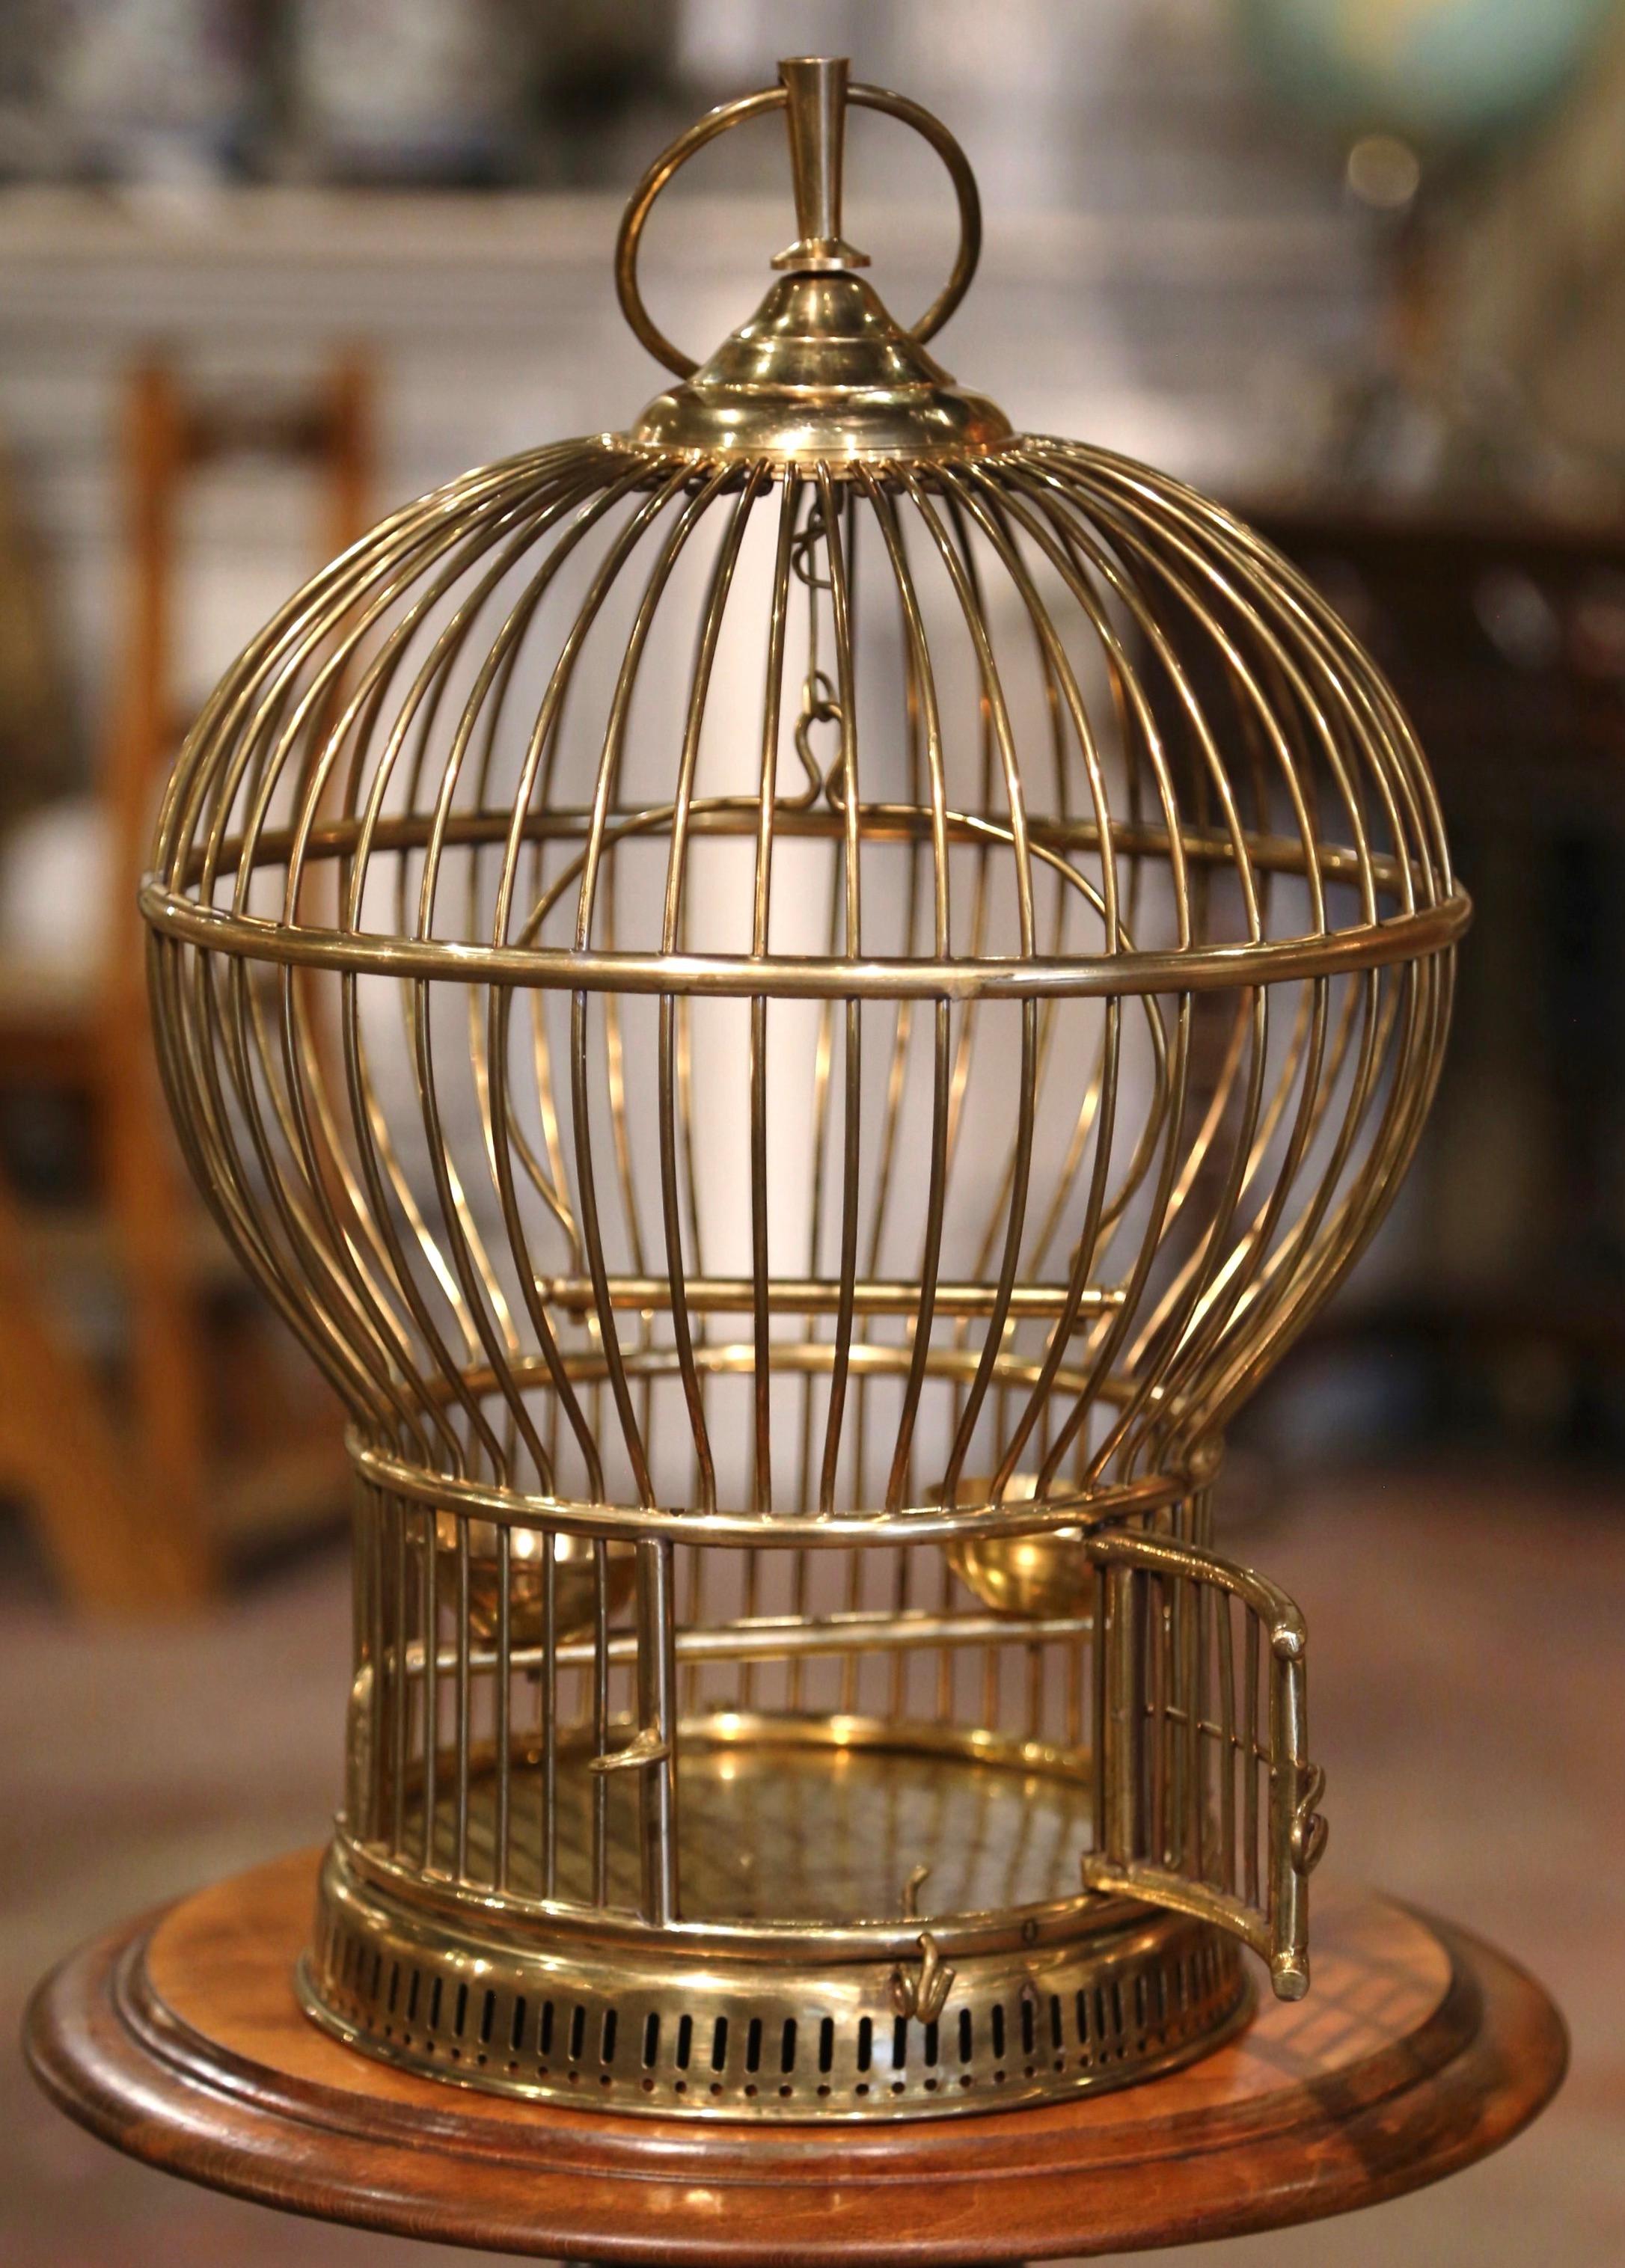 Decorate your home with this whimsical antique bird cage. Crafted in the Alsace Lorraine region of France, circa 1920, this Napoleon III cage made of brass, is cylindrical in shape and topped with a rounded dome embellished with a decorative hanging